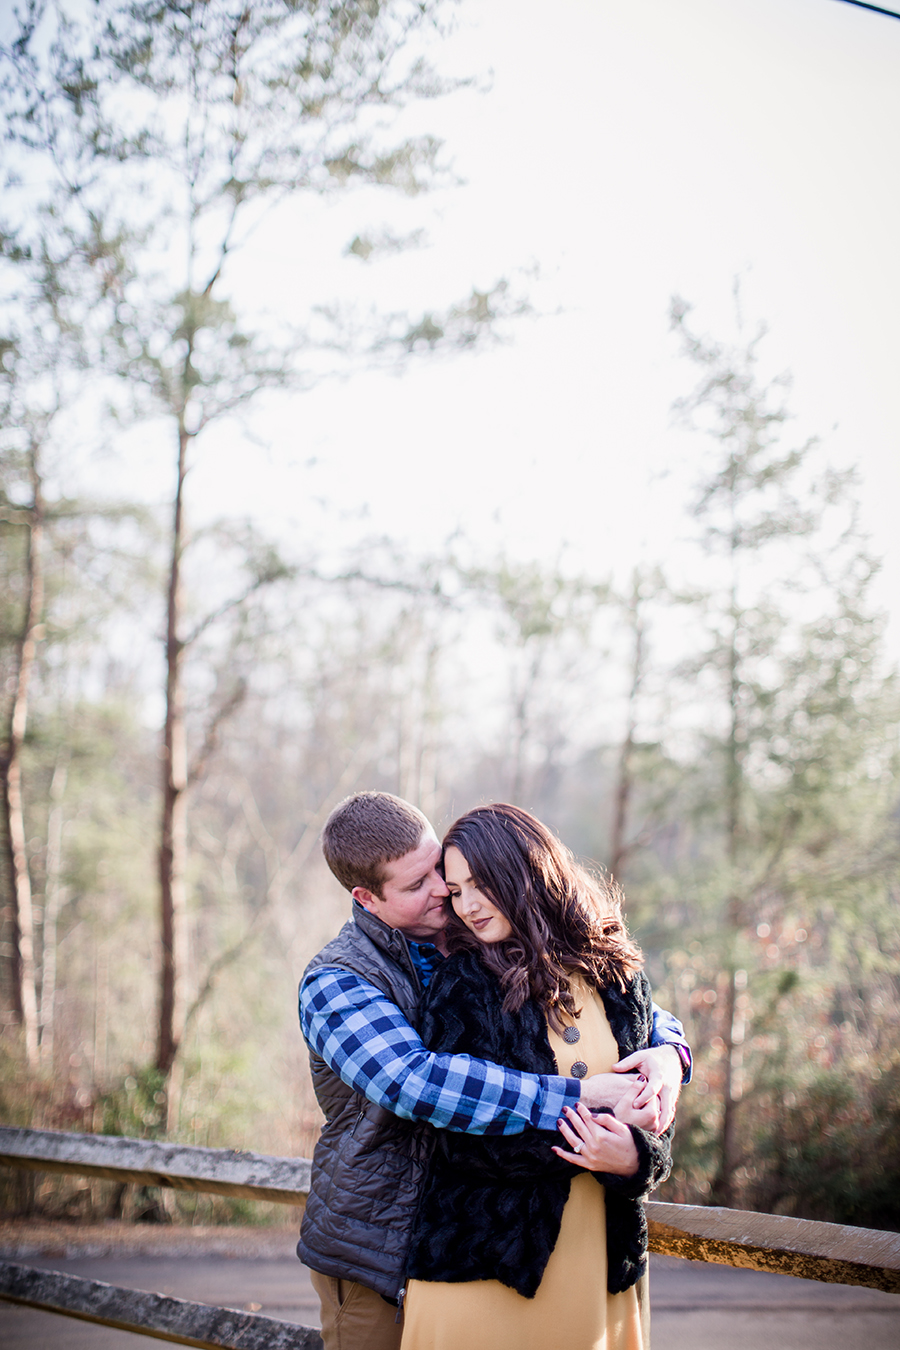 Hugging her from behind by Knoxville Wedding Photographer, Amanda May Photos.